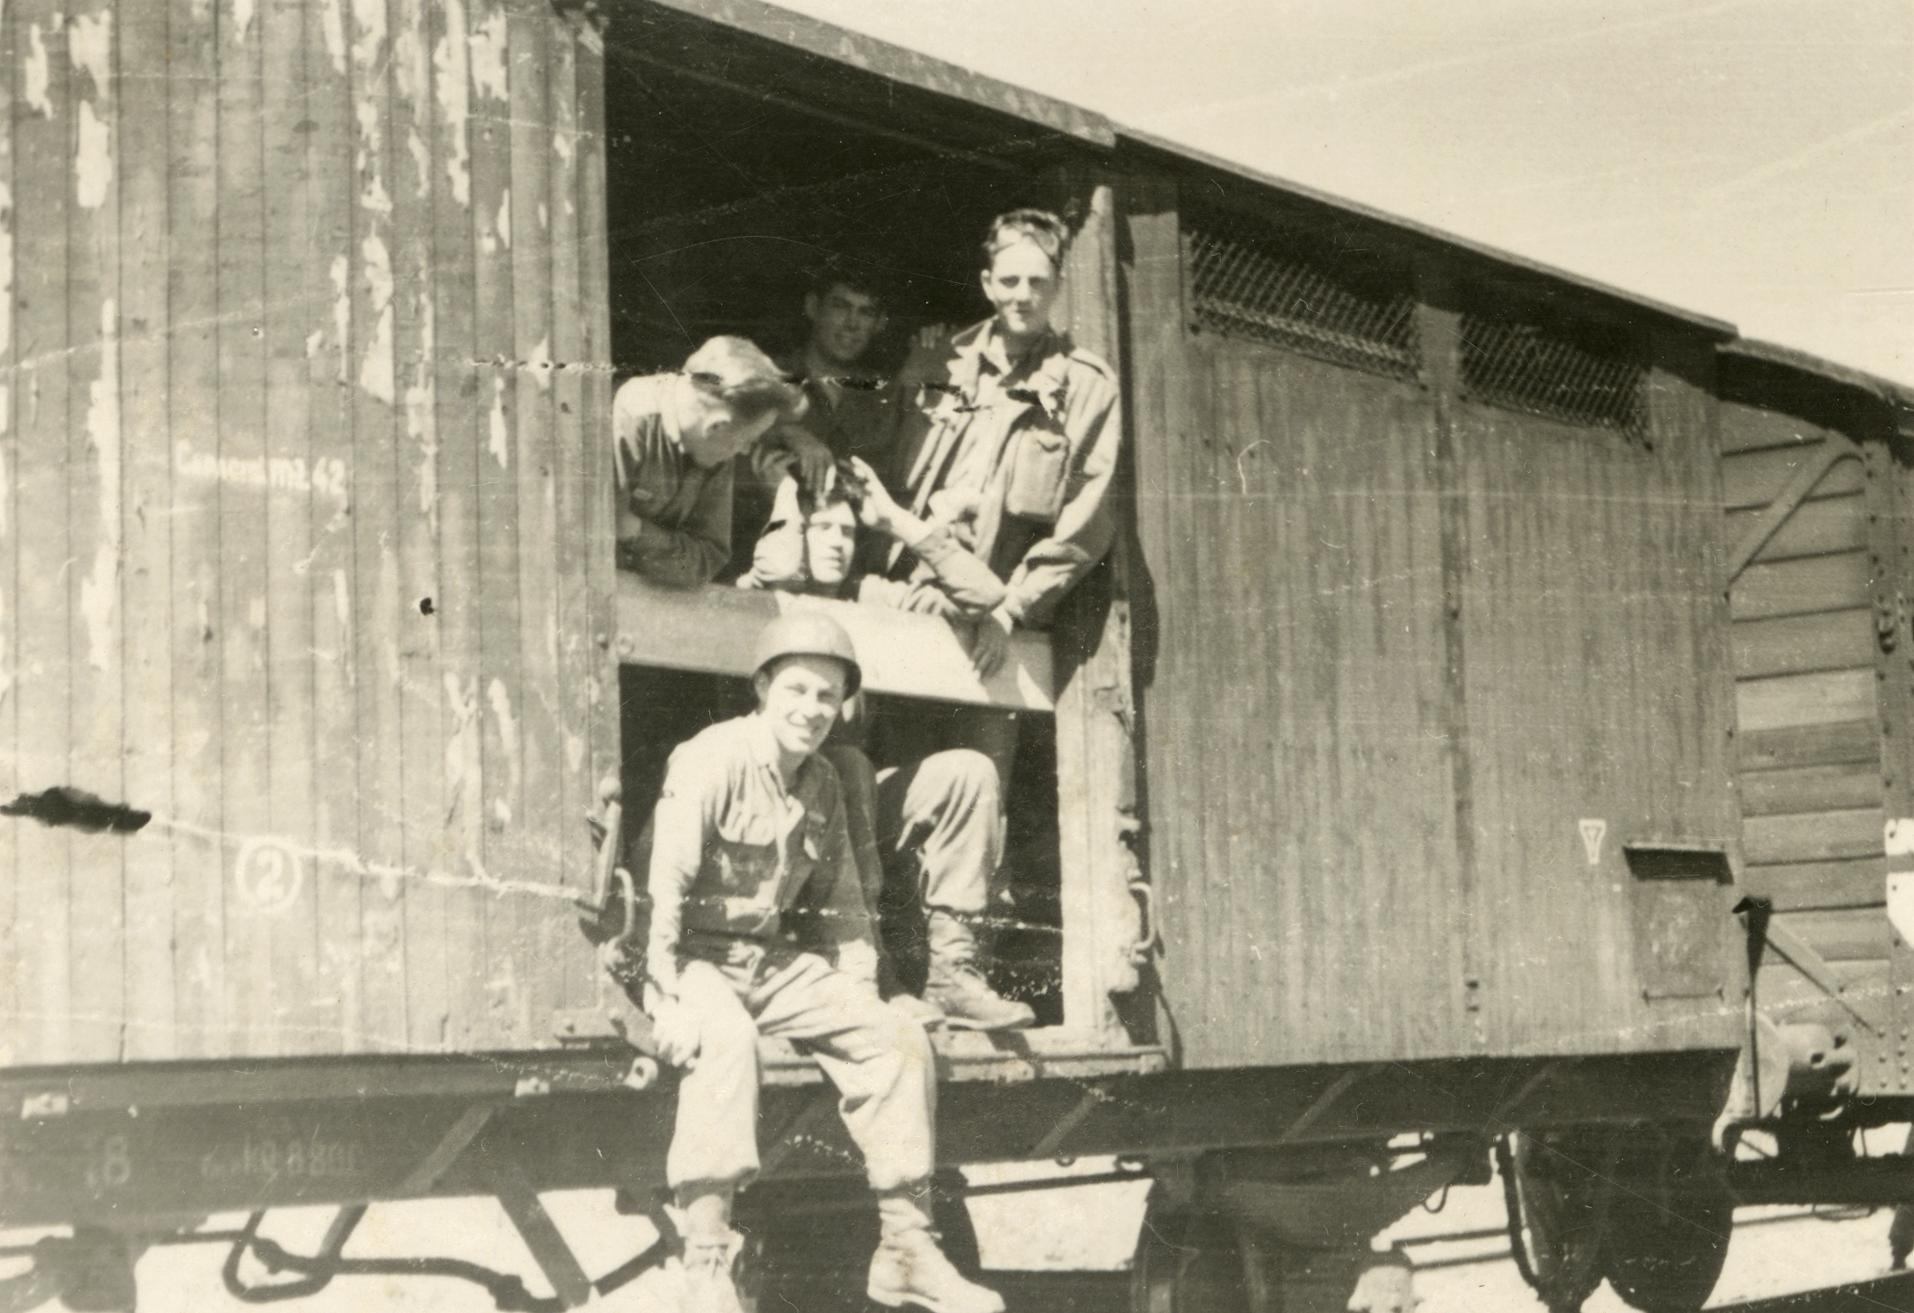 Ray Cunneen sitting in the doorway of the box car